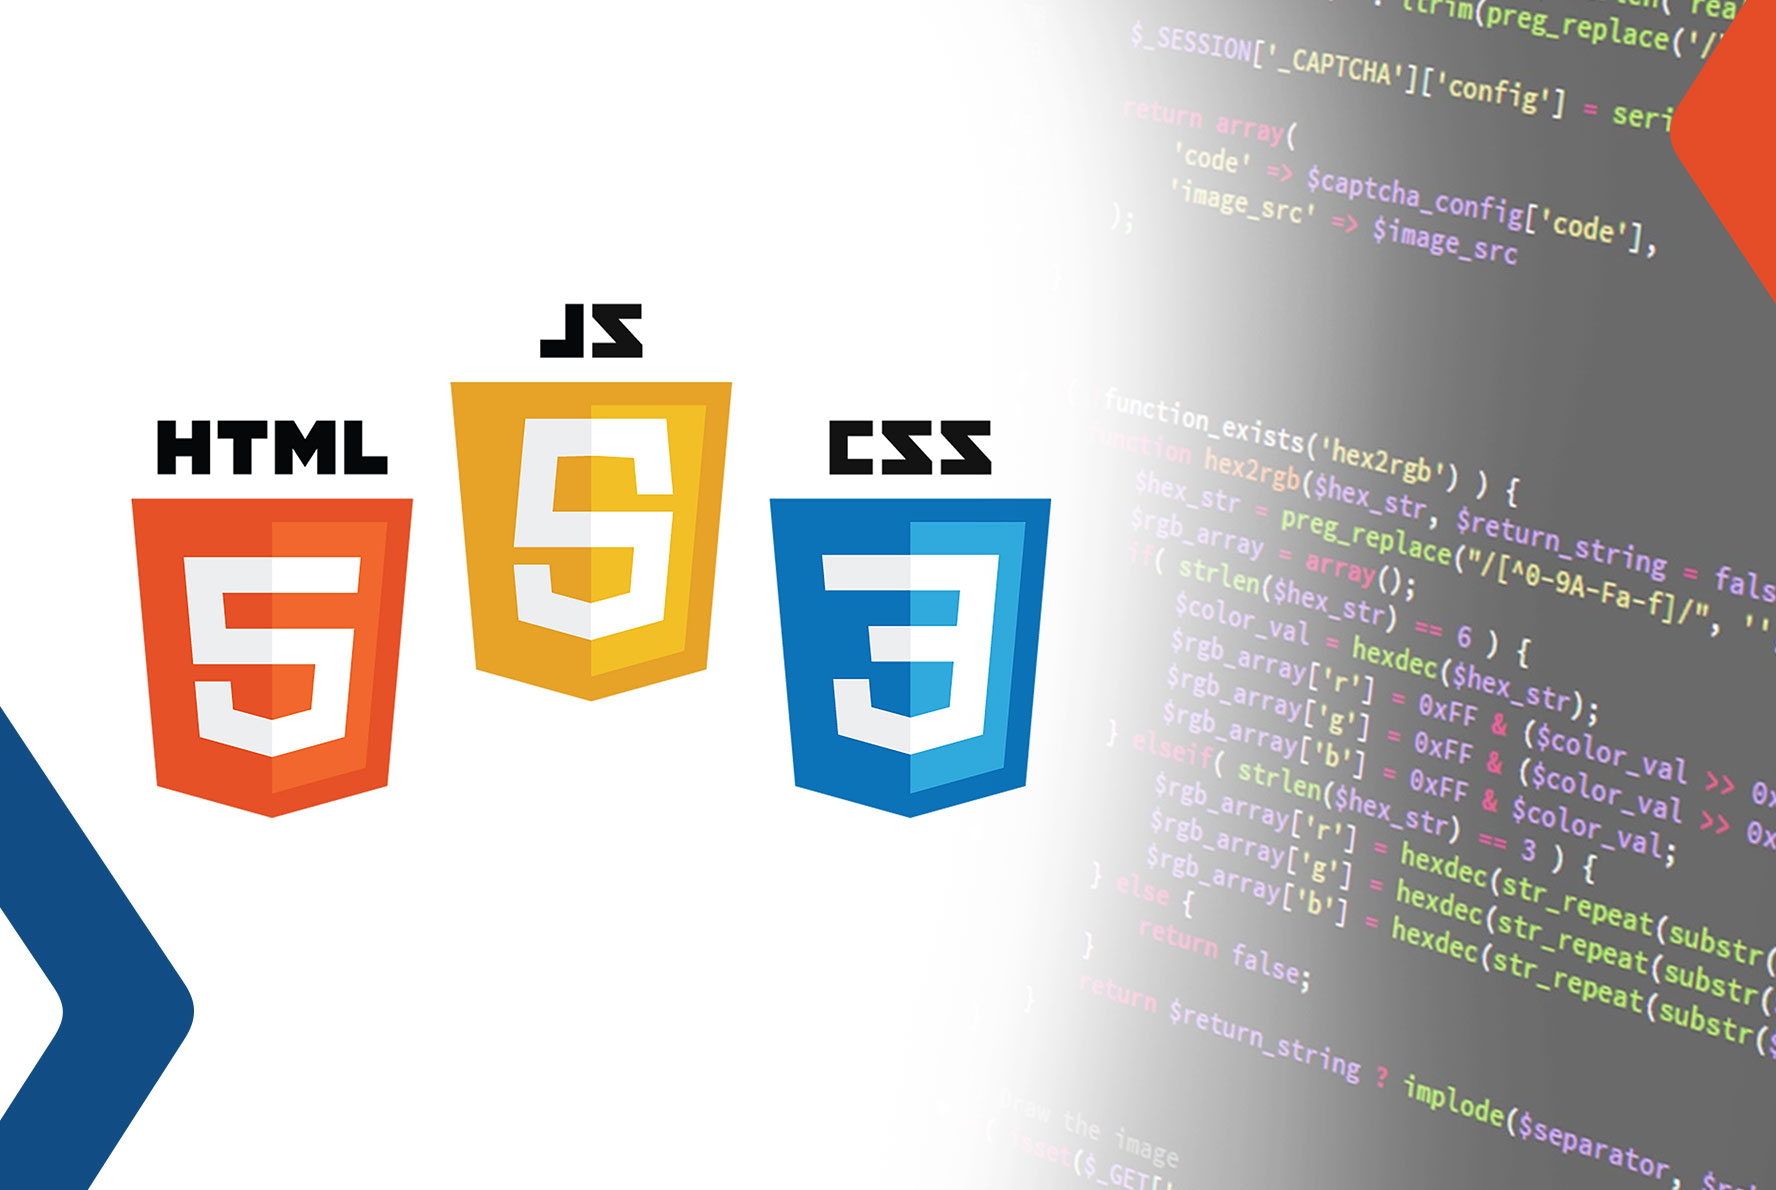 Programming in HTML5 with JavaScript and CSS3